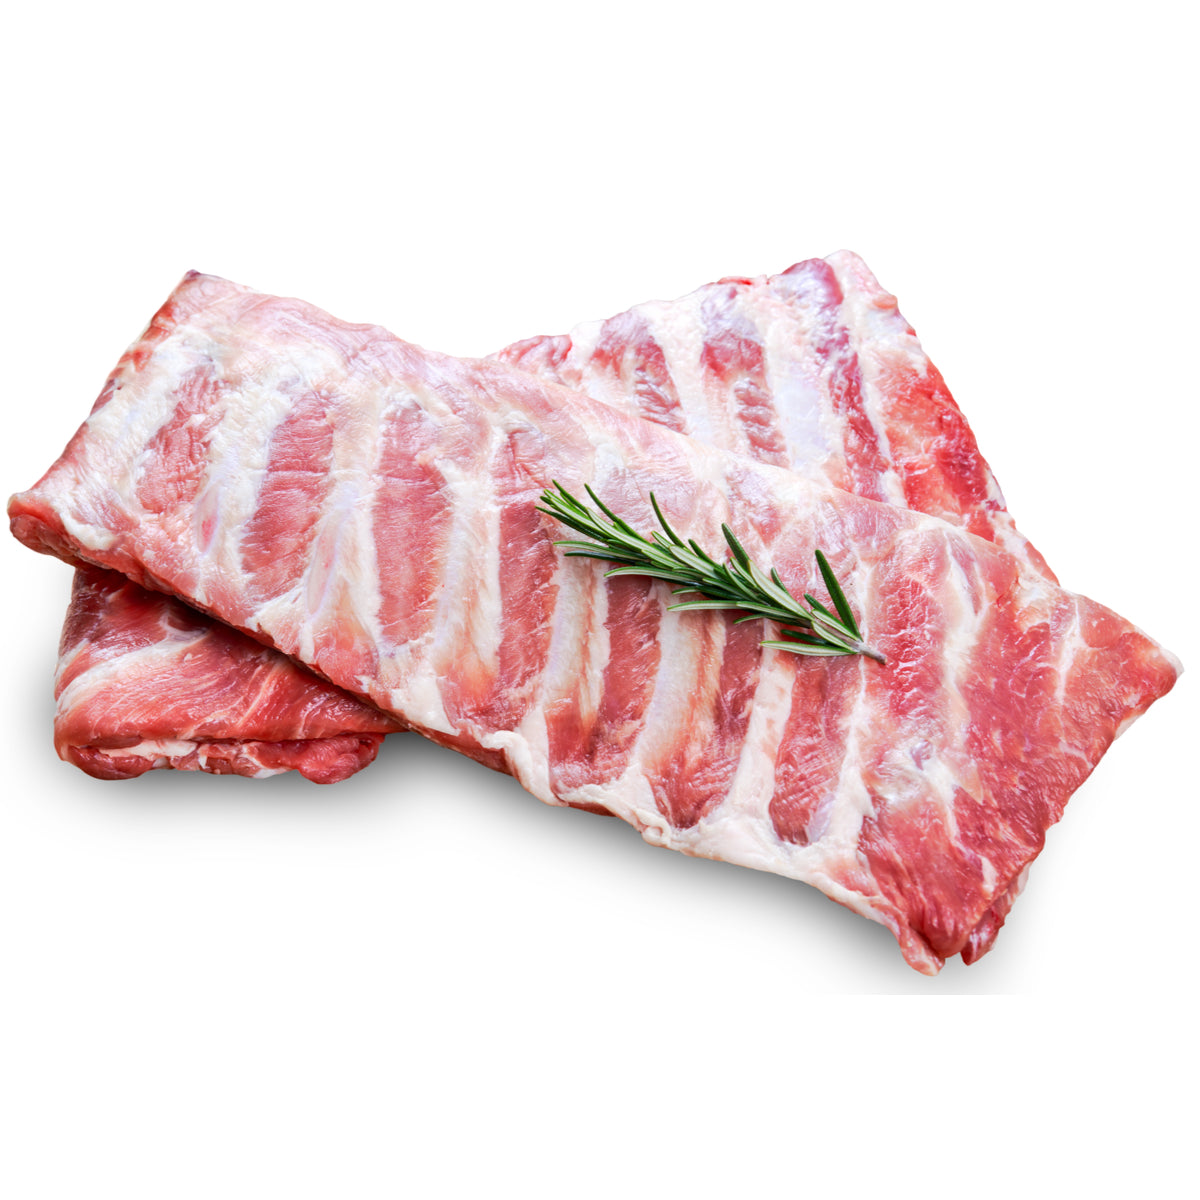 PORK BABY BACK RIBS WITH CHUNKY BARBEQUE MARINADE (1kg)